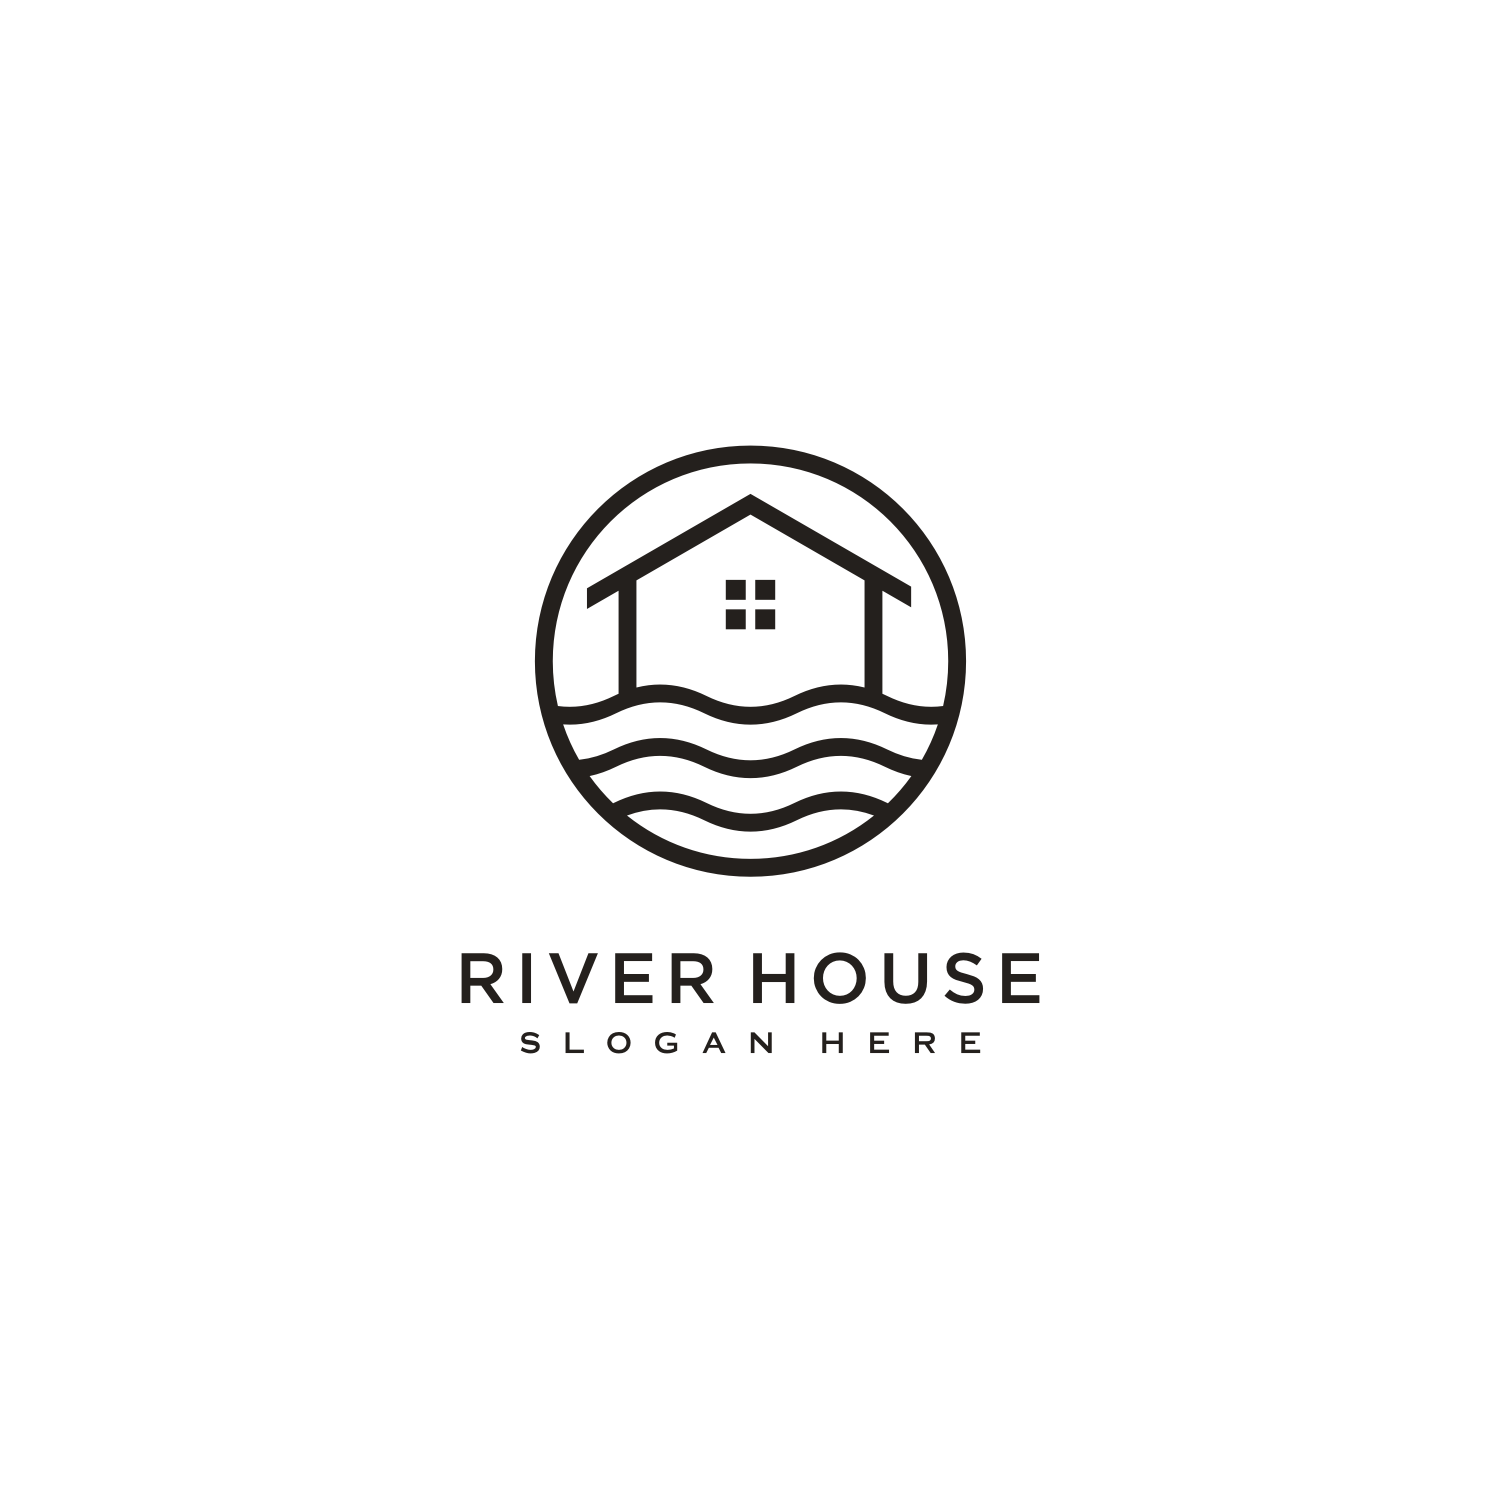 Set Of Minimalist Line Abstract House With River Logo Design White.